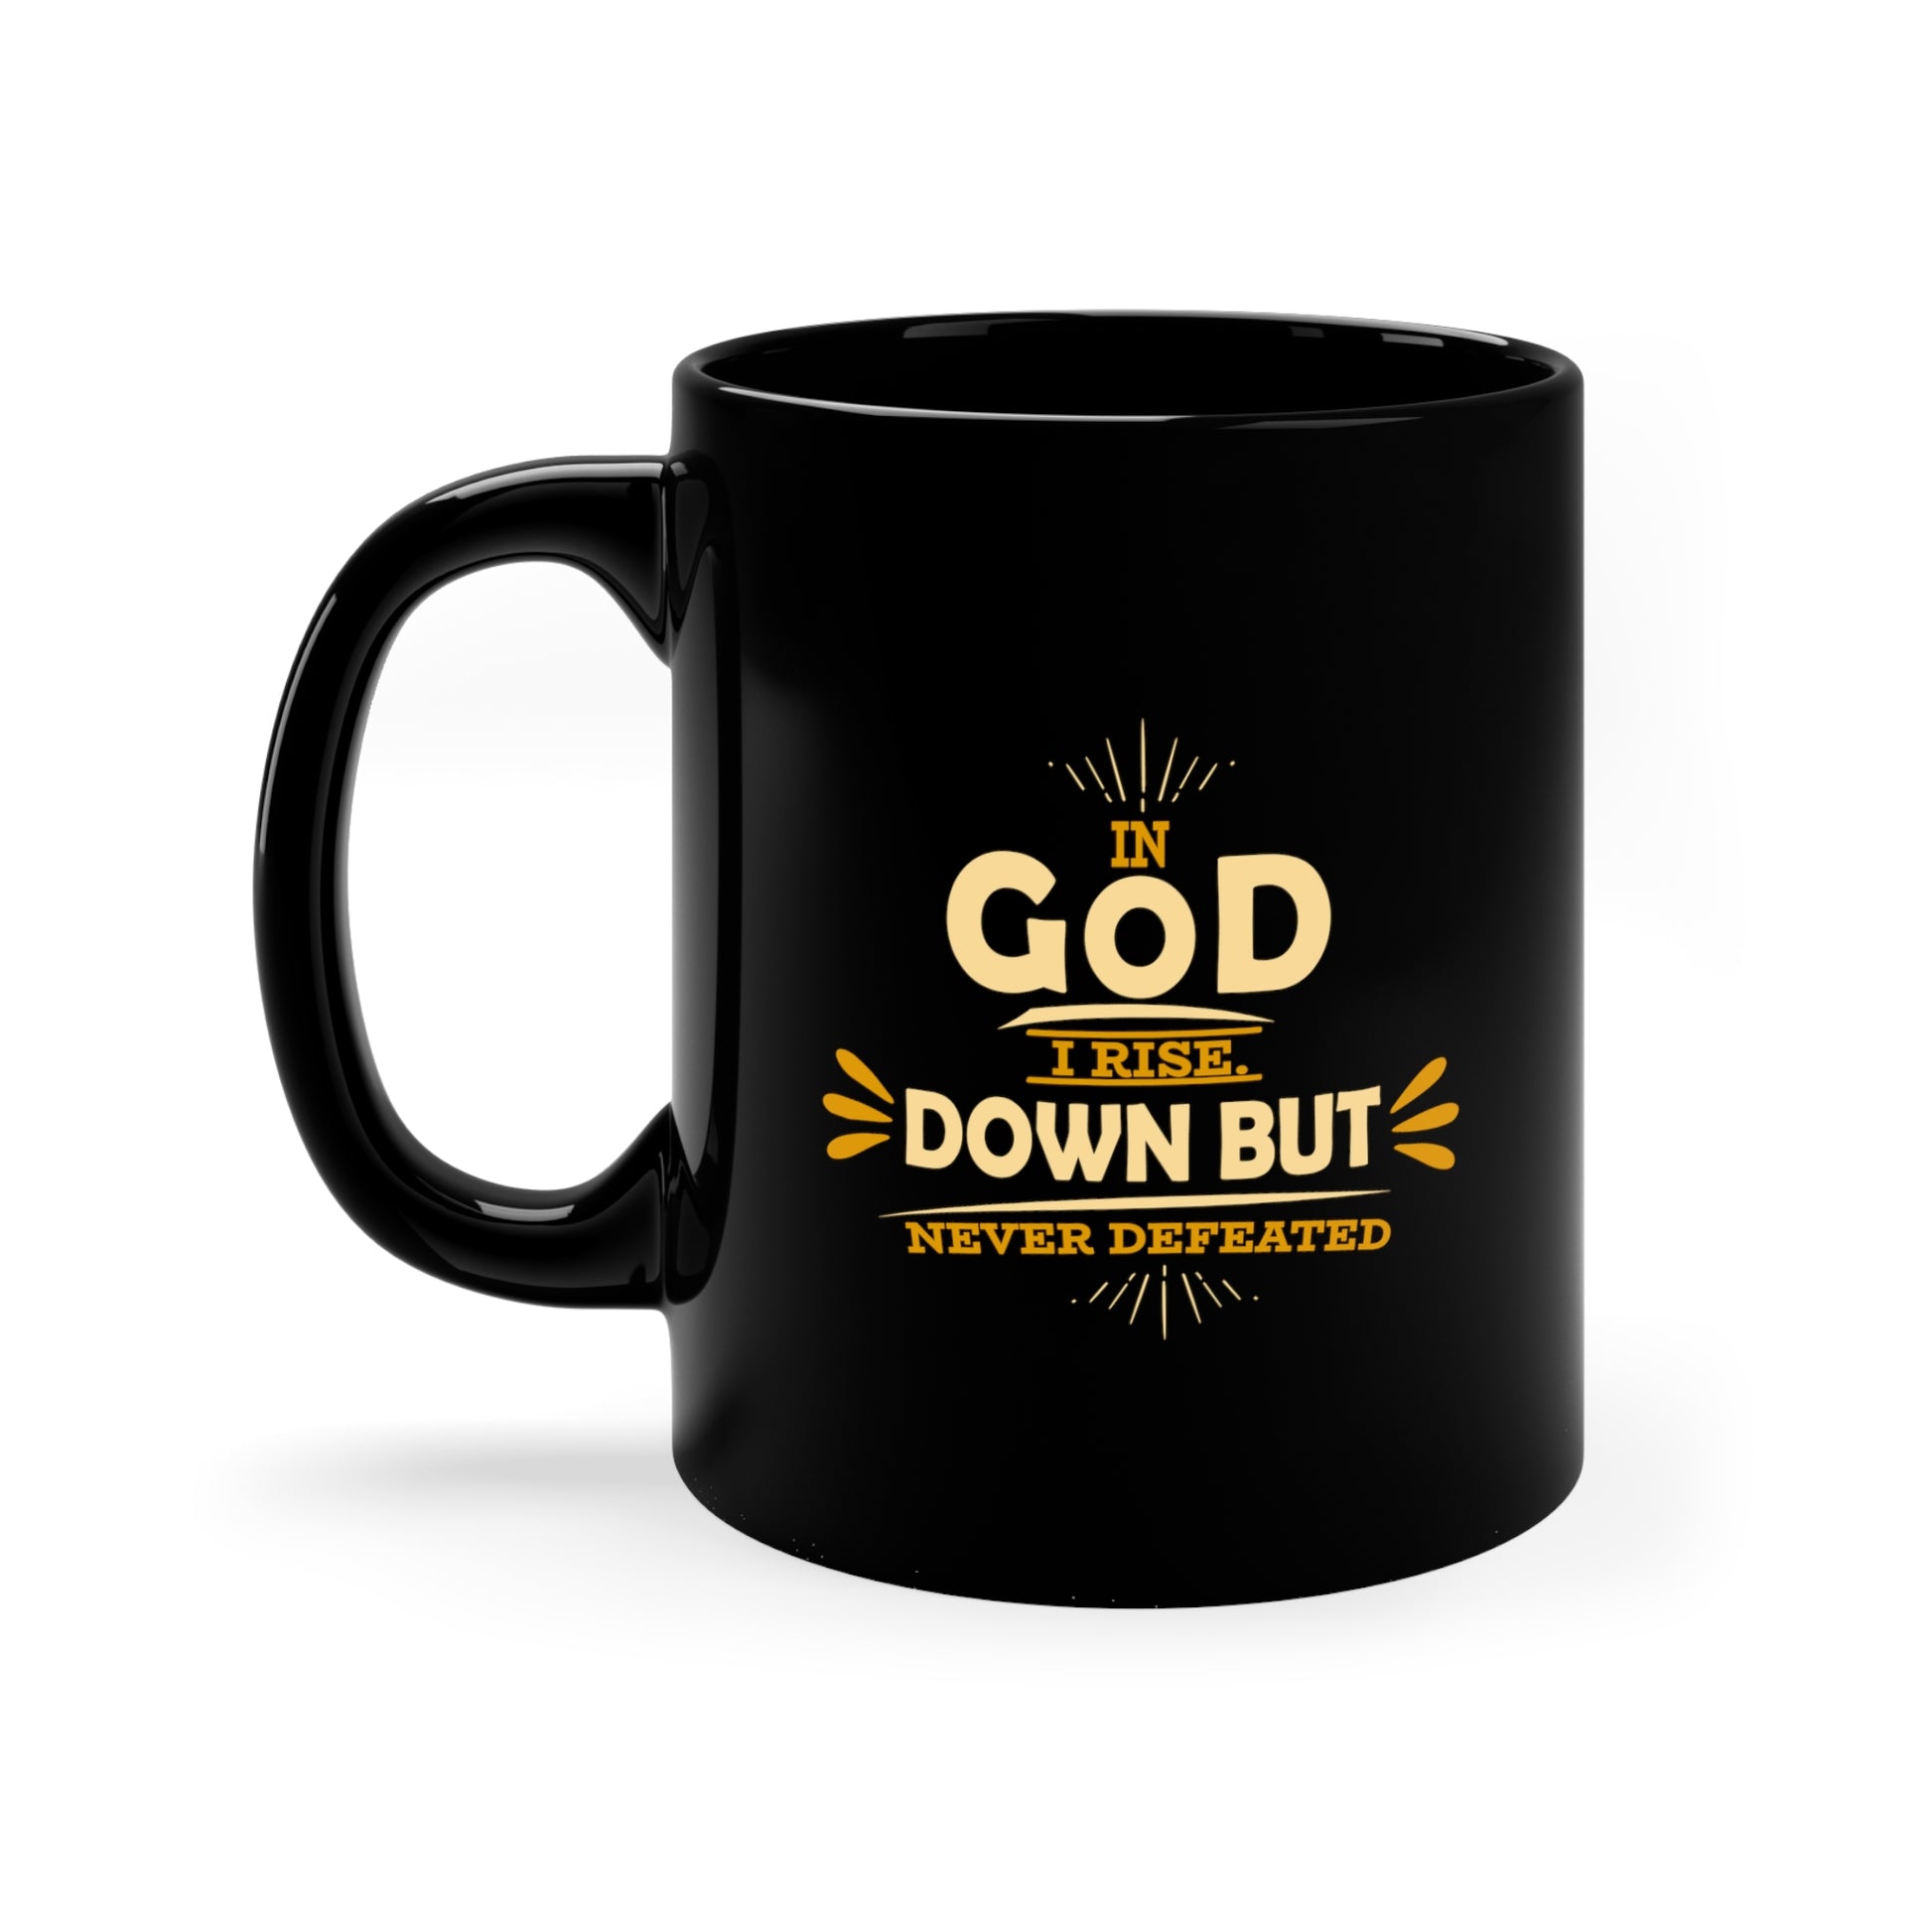 In God I Rise Down But Never Defeated Black Ceramic Mug 11oz (double sided printing) Printify